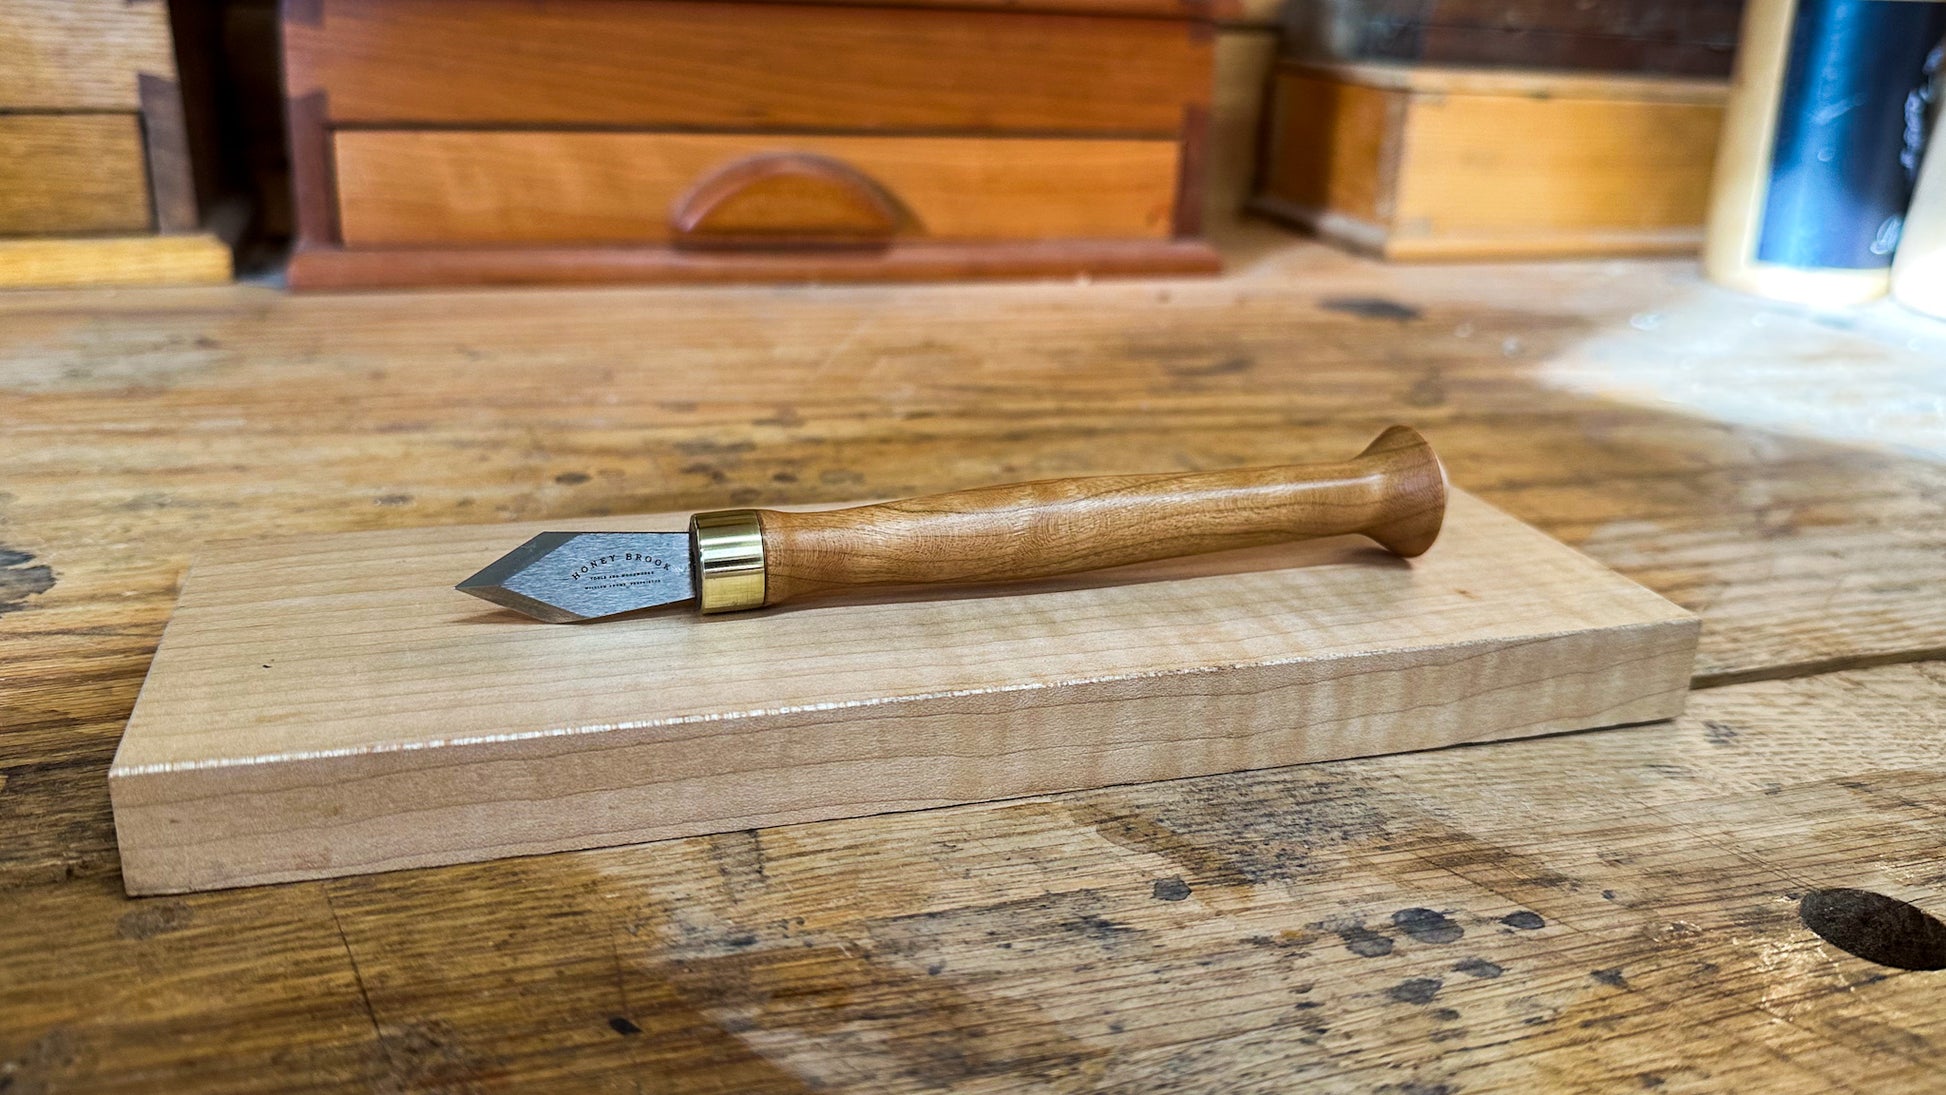 Limited Edition--Honey Brook Marking Knife in Pau Rosa Wood - Honey Brook  Tools and Woodworks